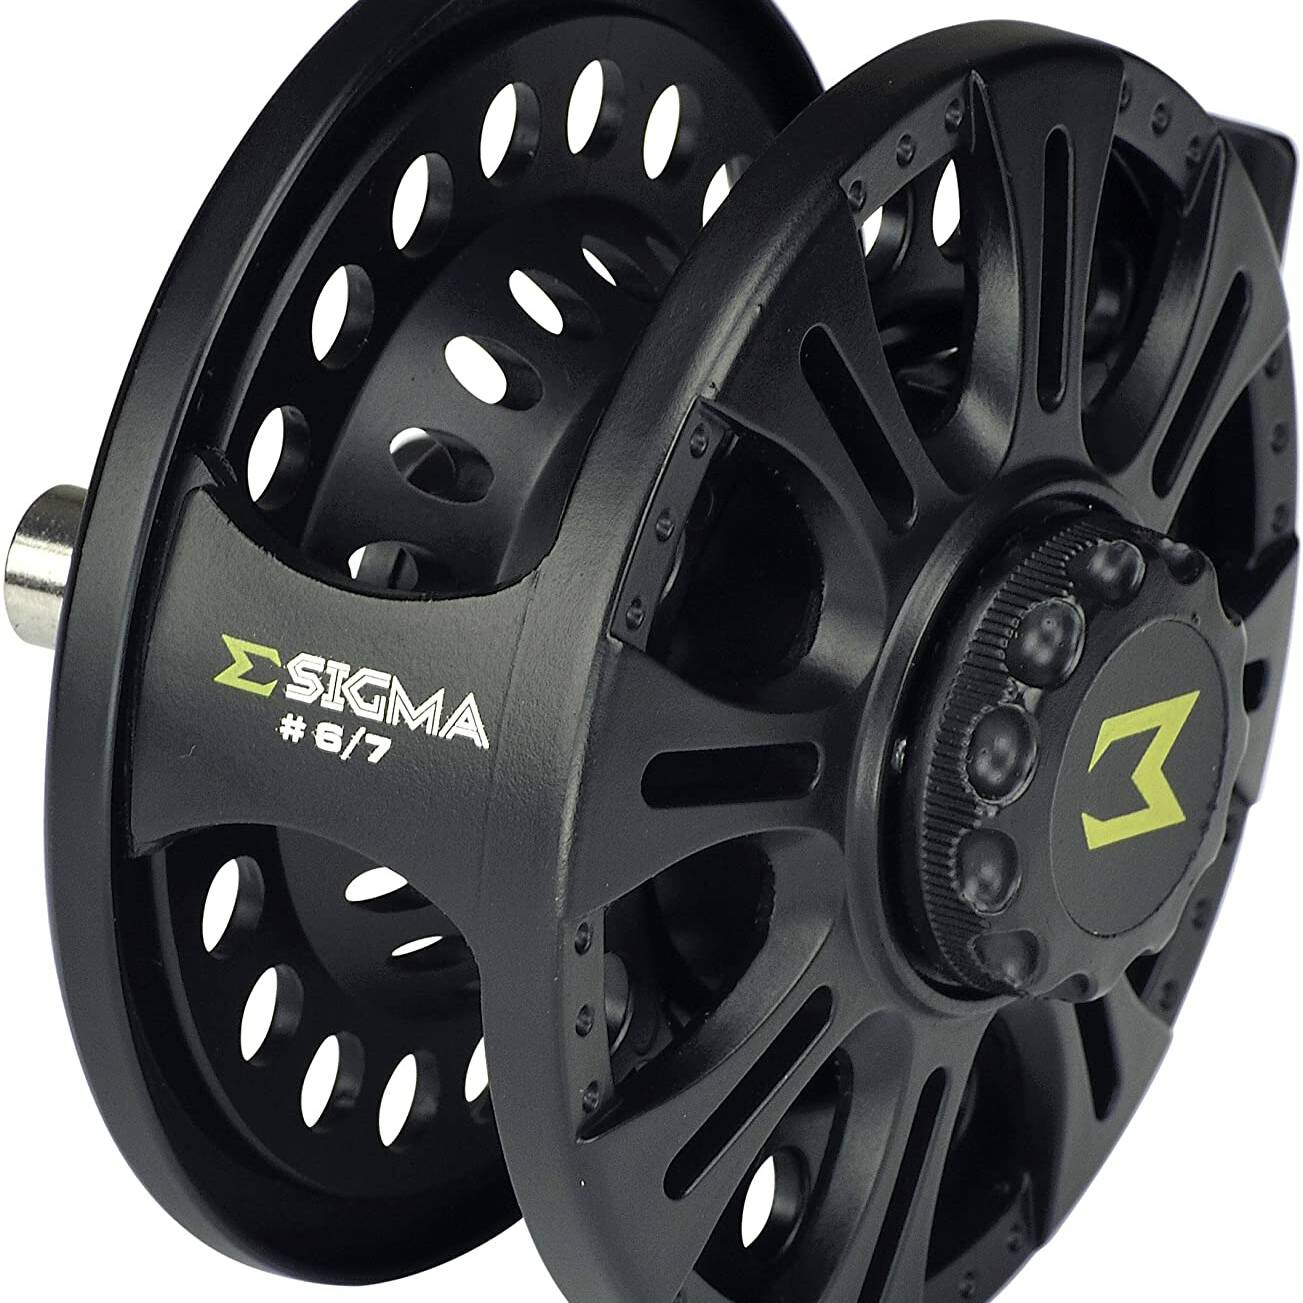 Shakespeare SIGMA 5/6 FLY REEL